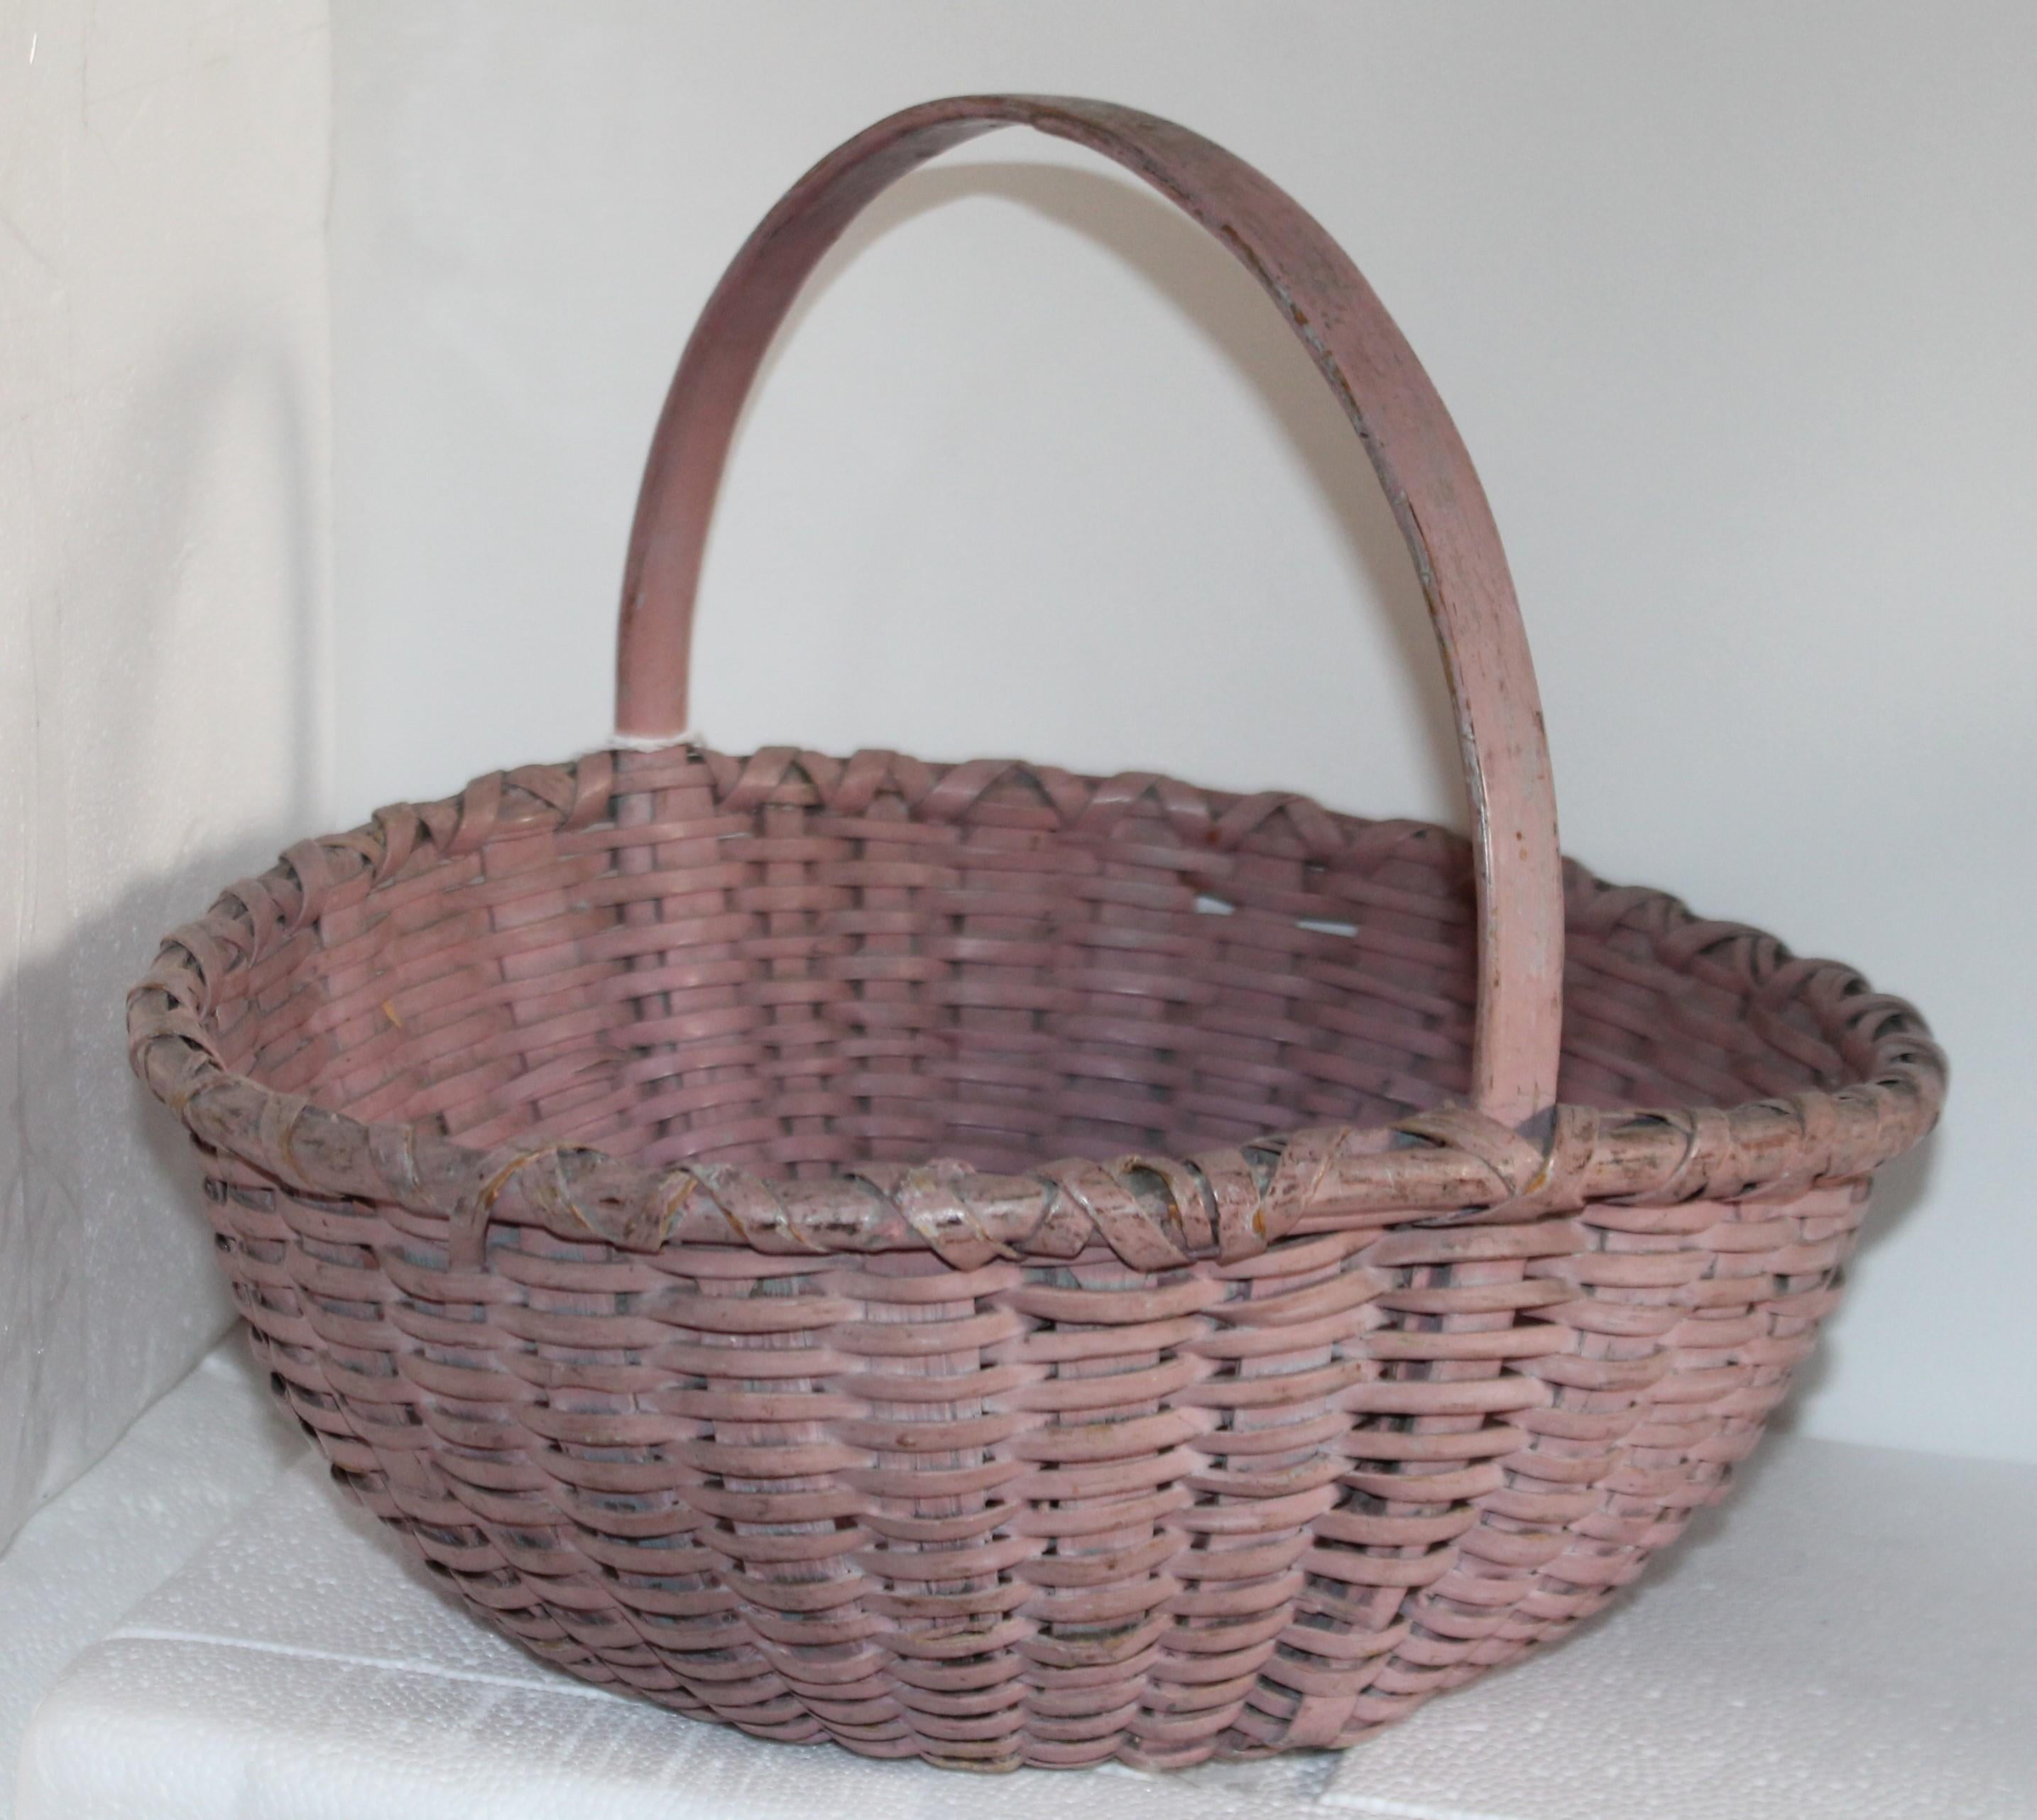 19th century original mauve painted handled basket from New England.